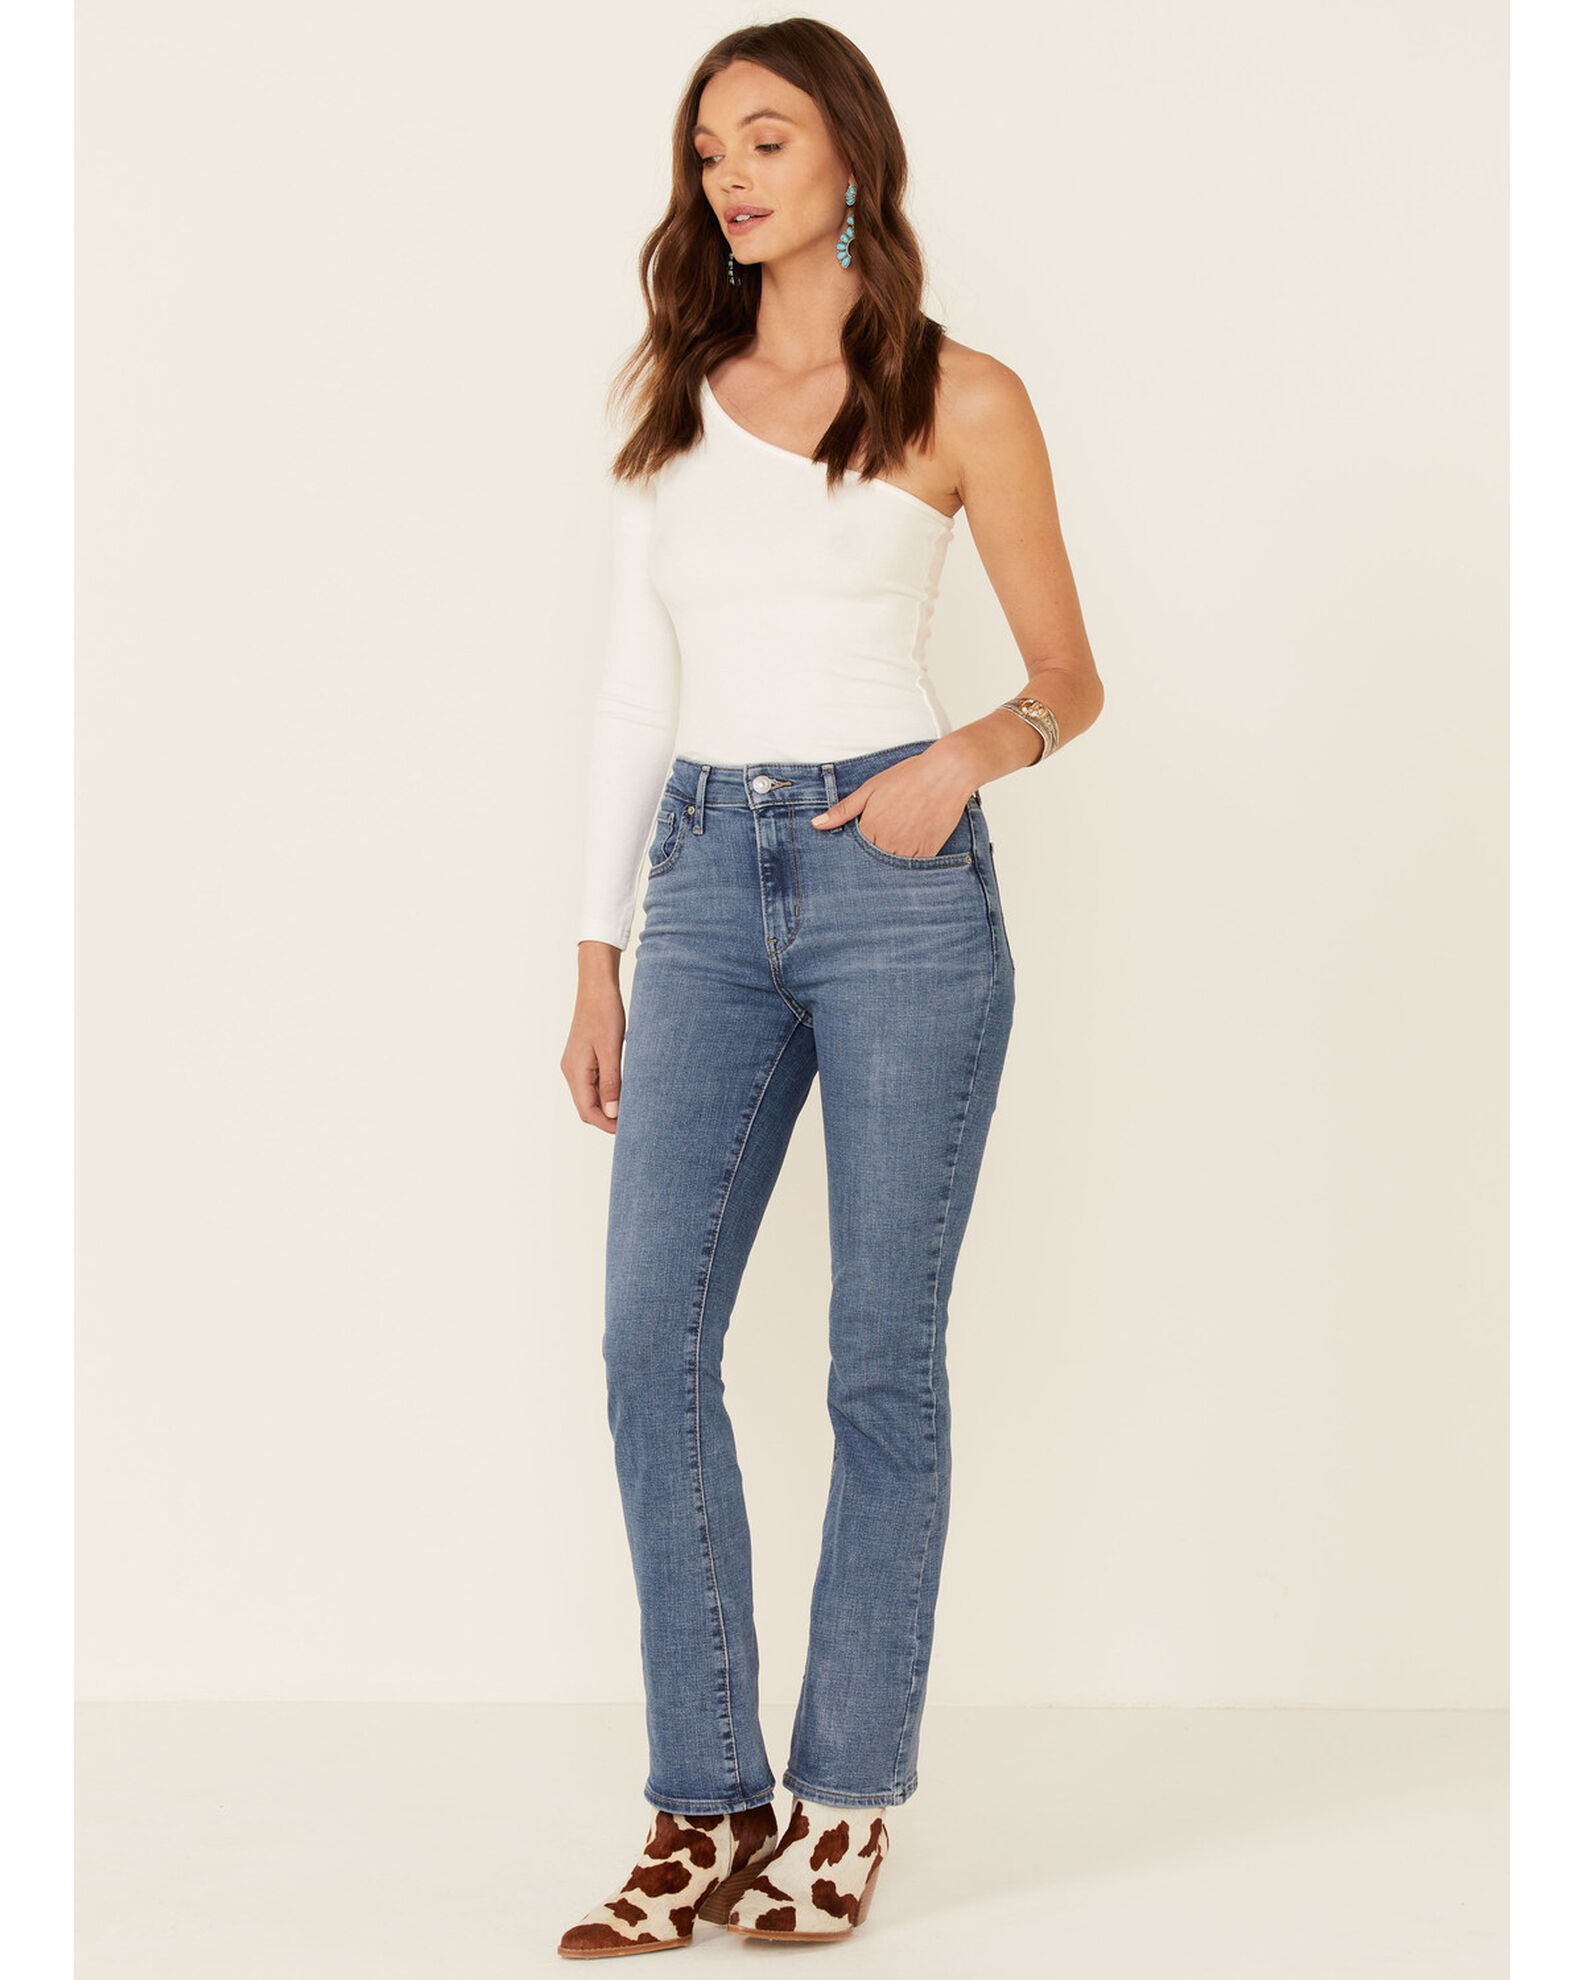 Levi's Women's Classic Bootcut Jeans Boot Barn, 46% OFF